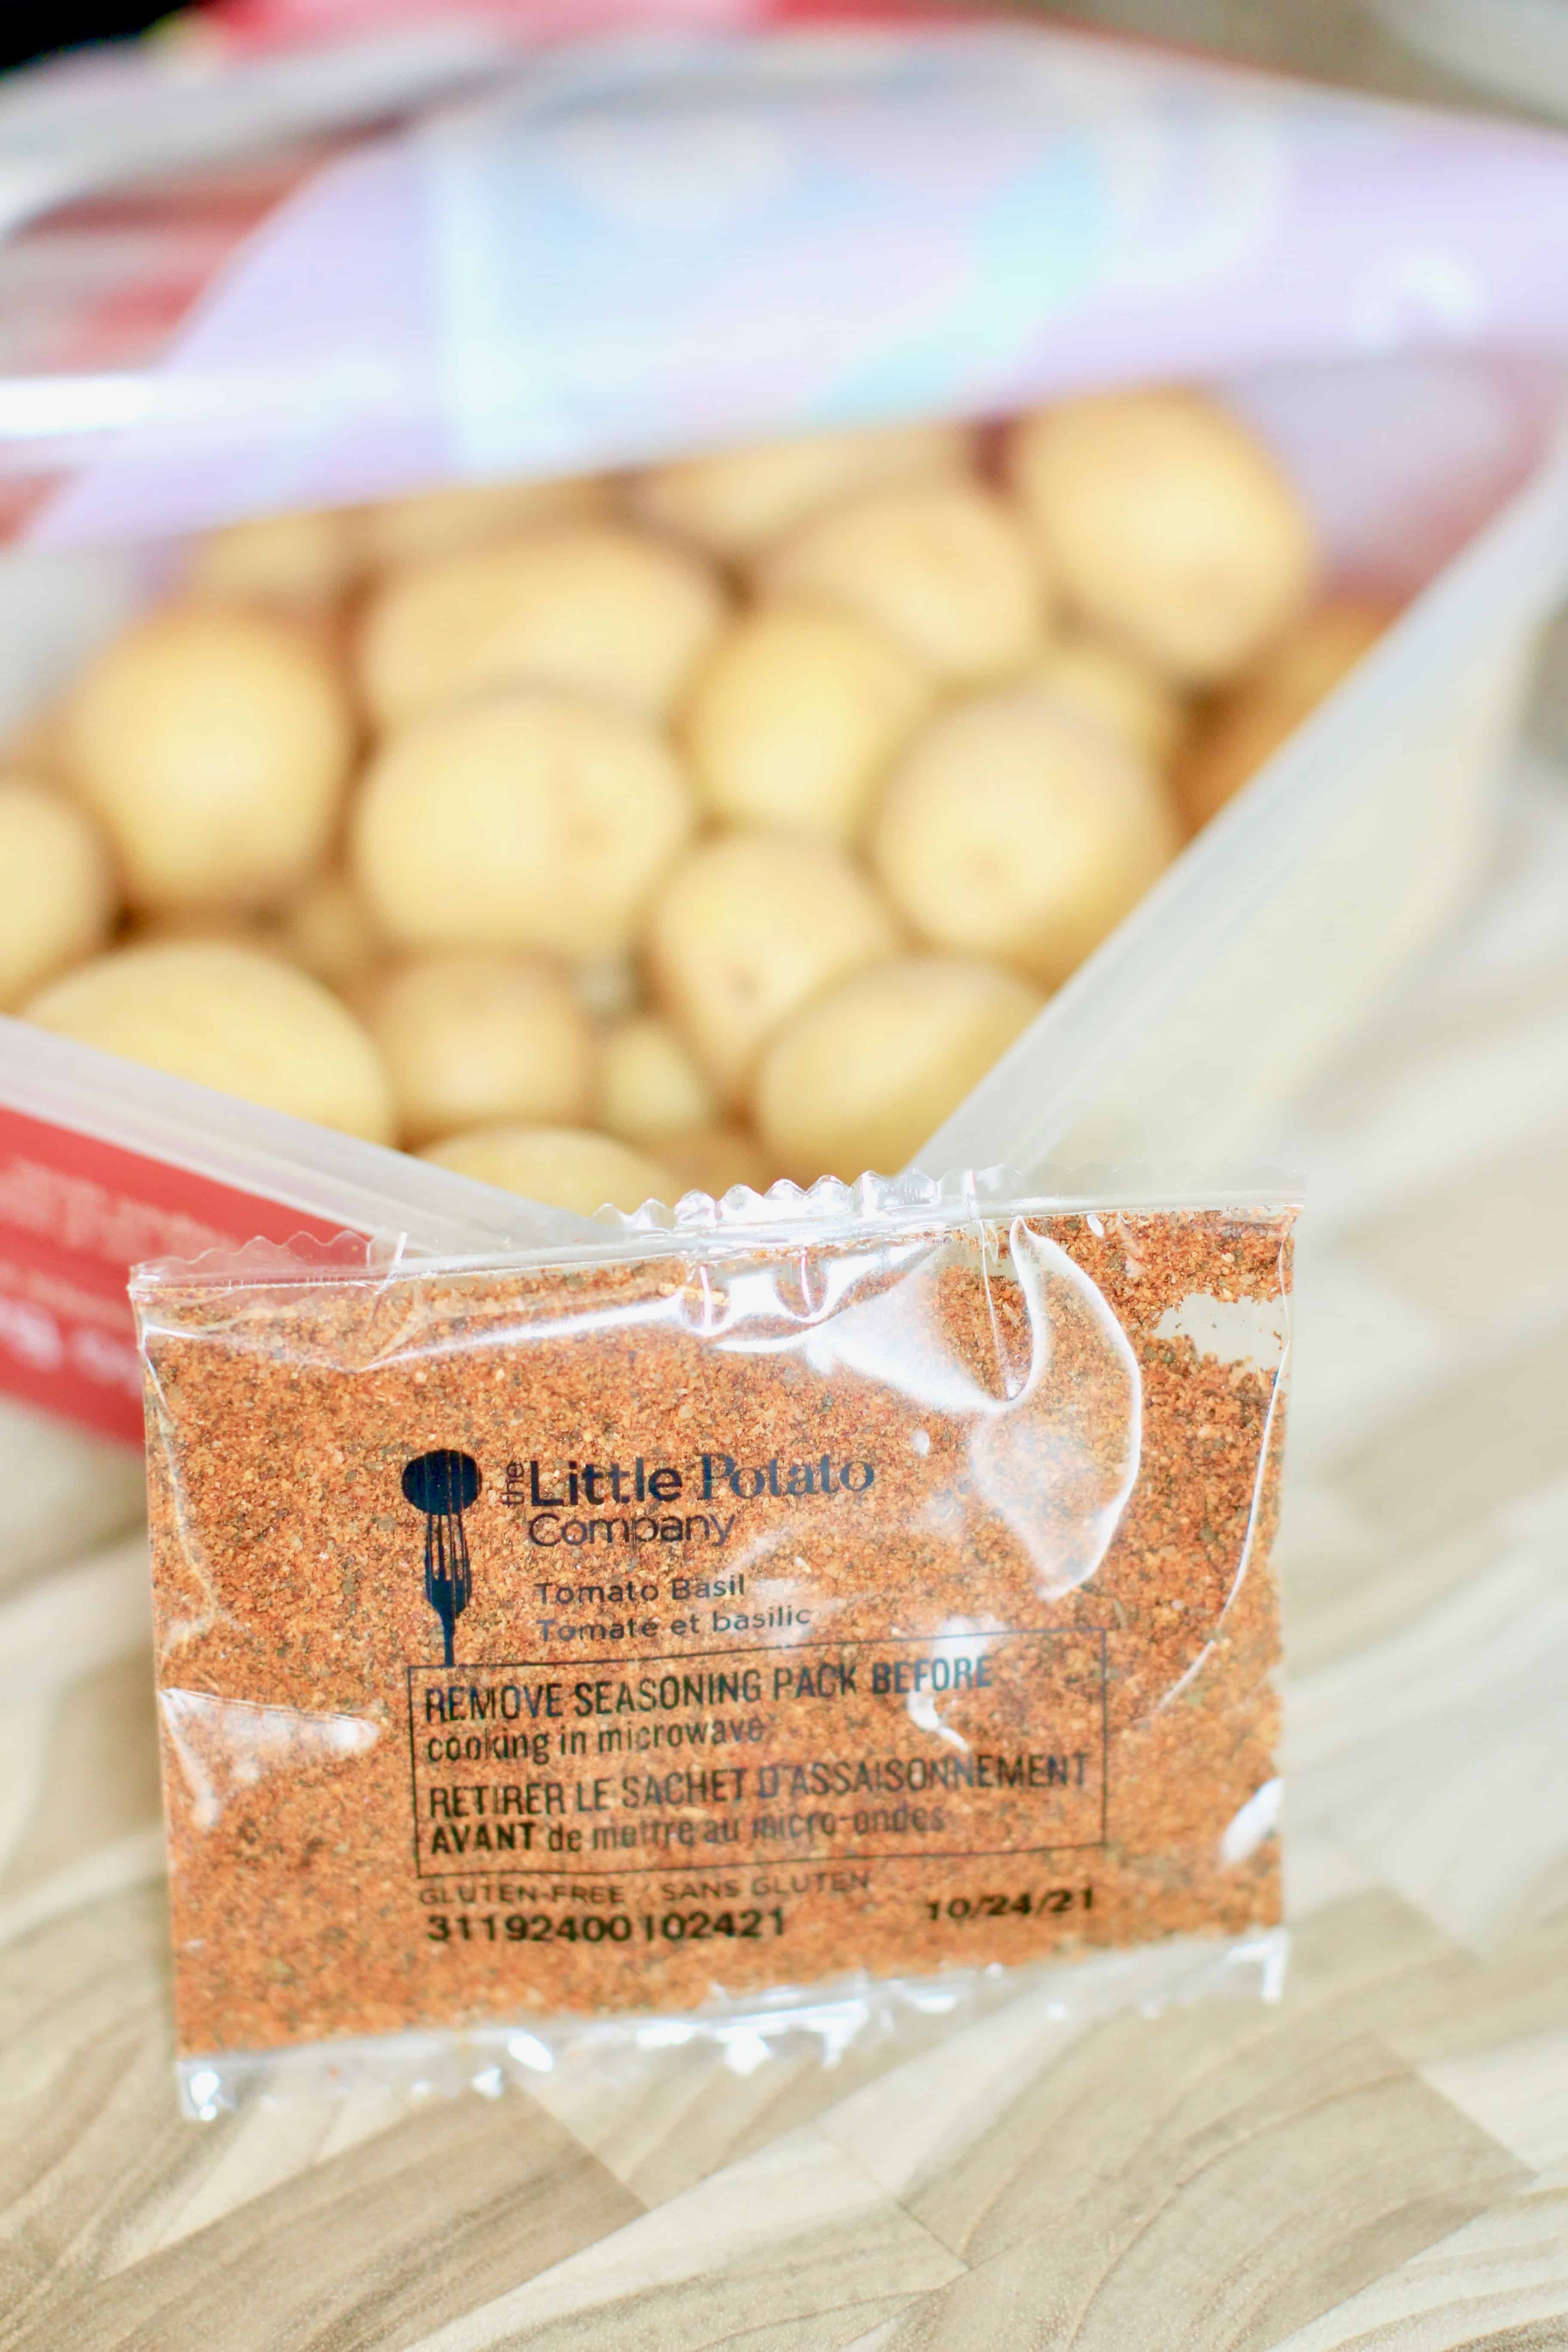 Microwaveable Tomato Basil Little Potatoes with seasoning packet removed from the container. 